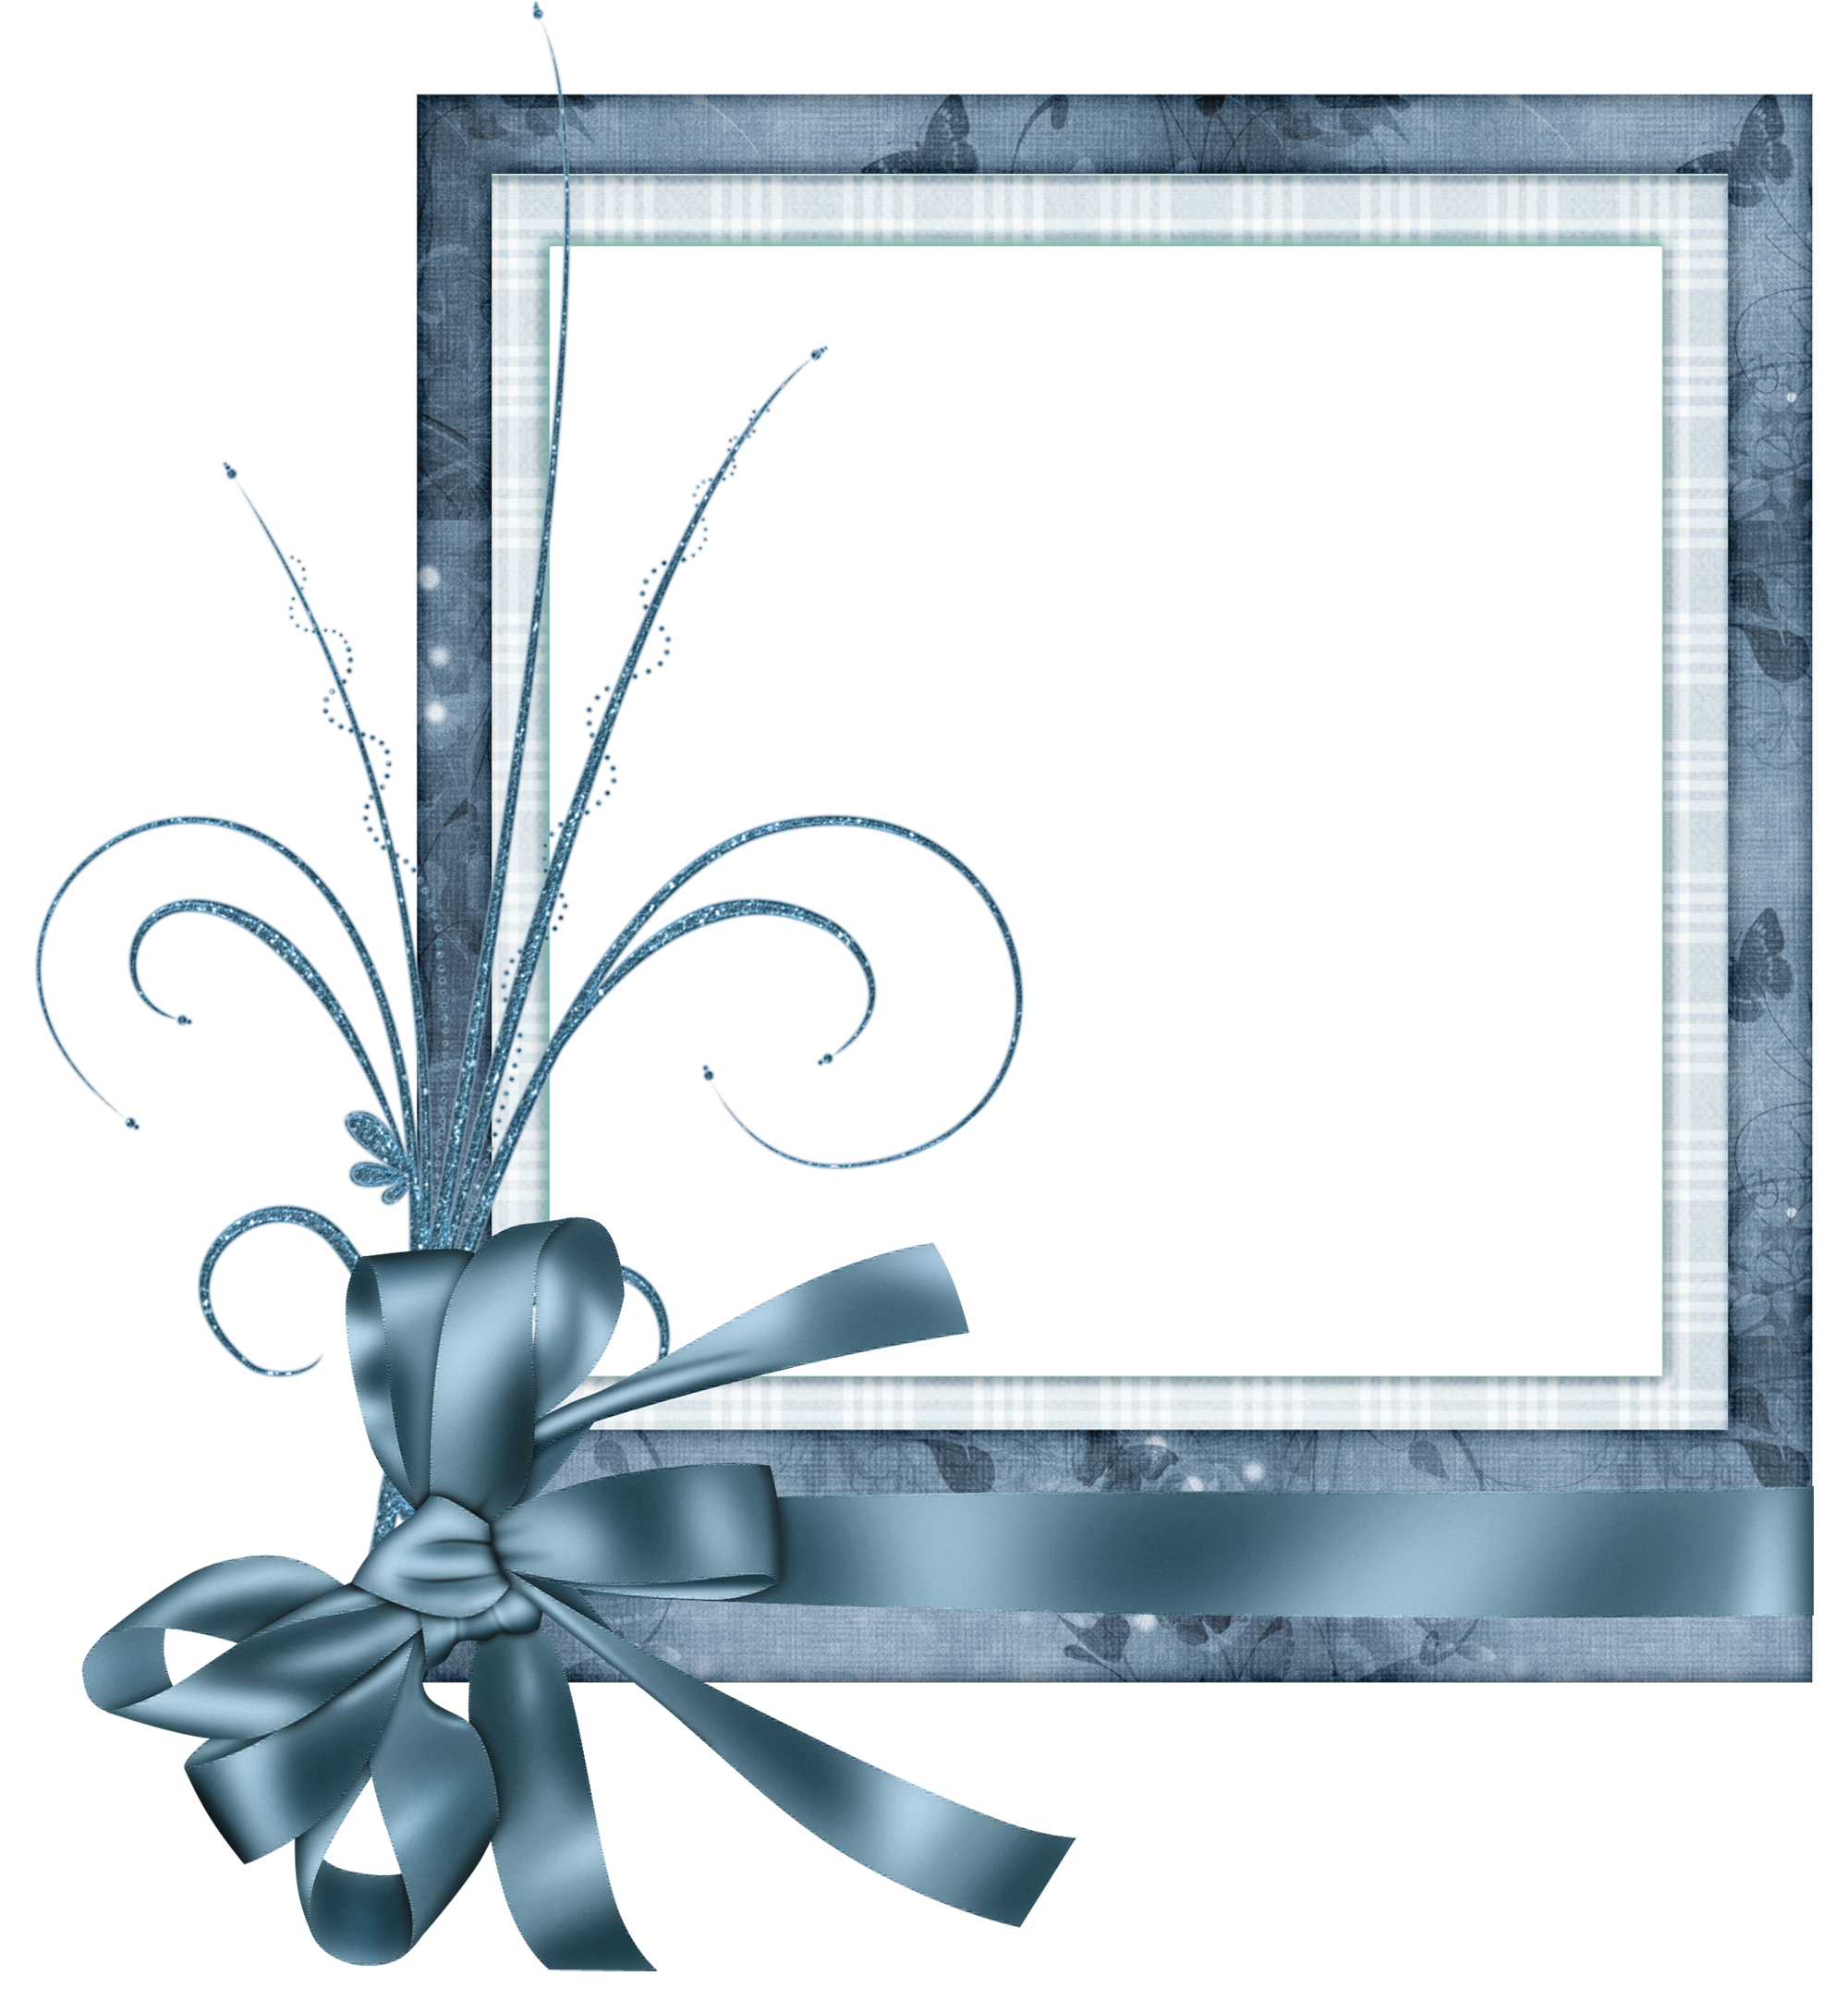 Cute Blue Transparent Frame with Bow